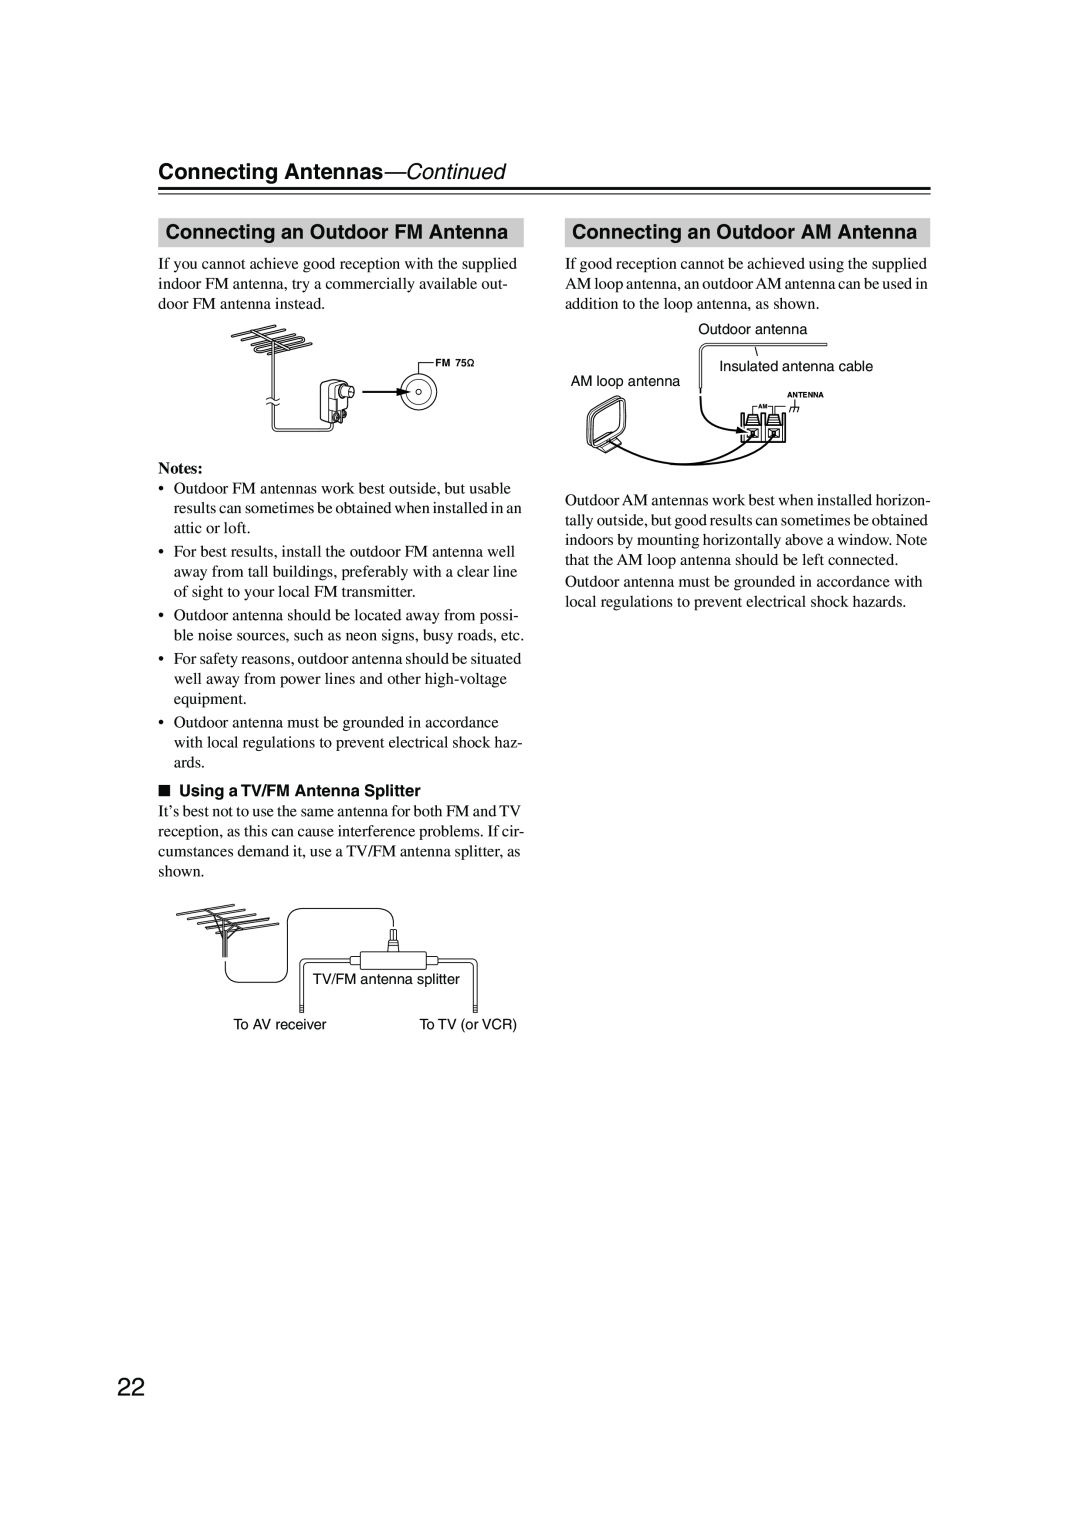 Onkyo HT-SP904 Connecting Antennas—Continued, Connecting an Outdoor FM Antenna, Connecting an Outdoor AM Antenna, Notes 